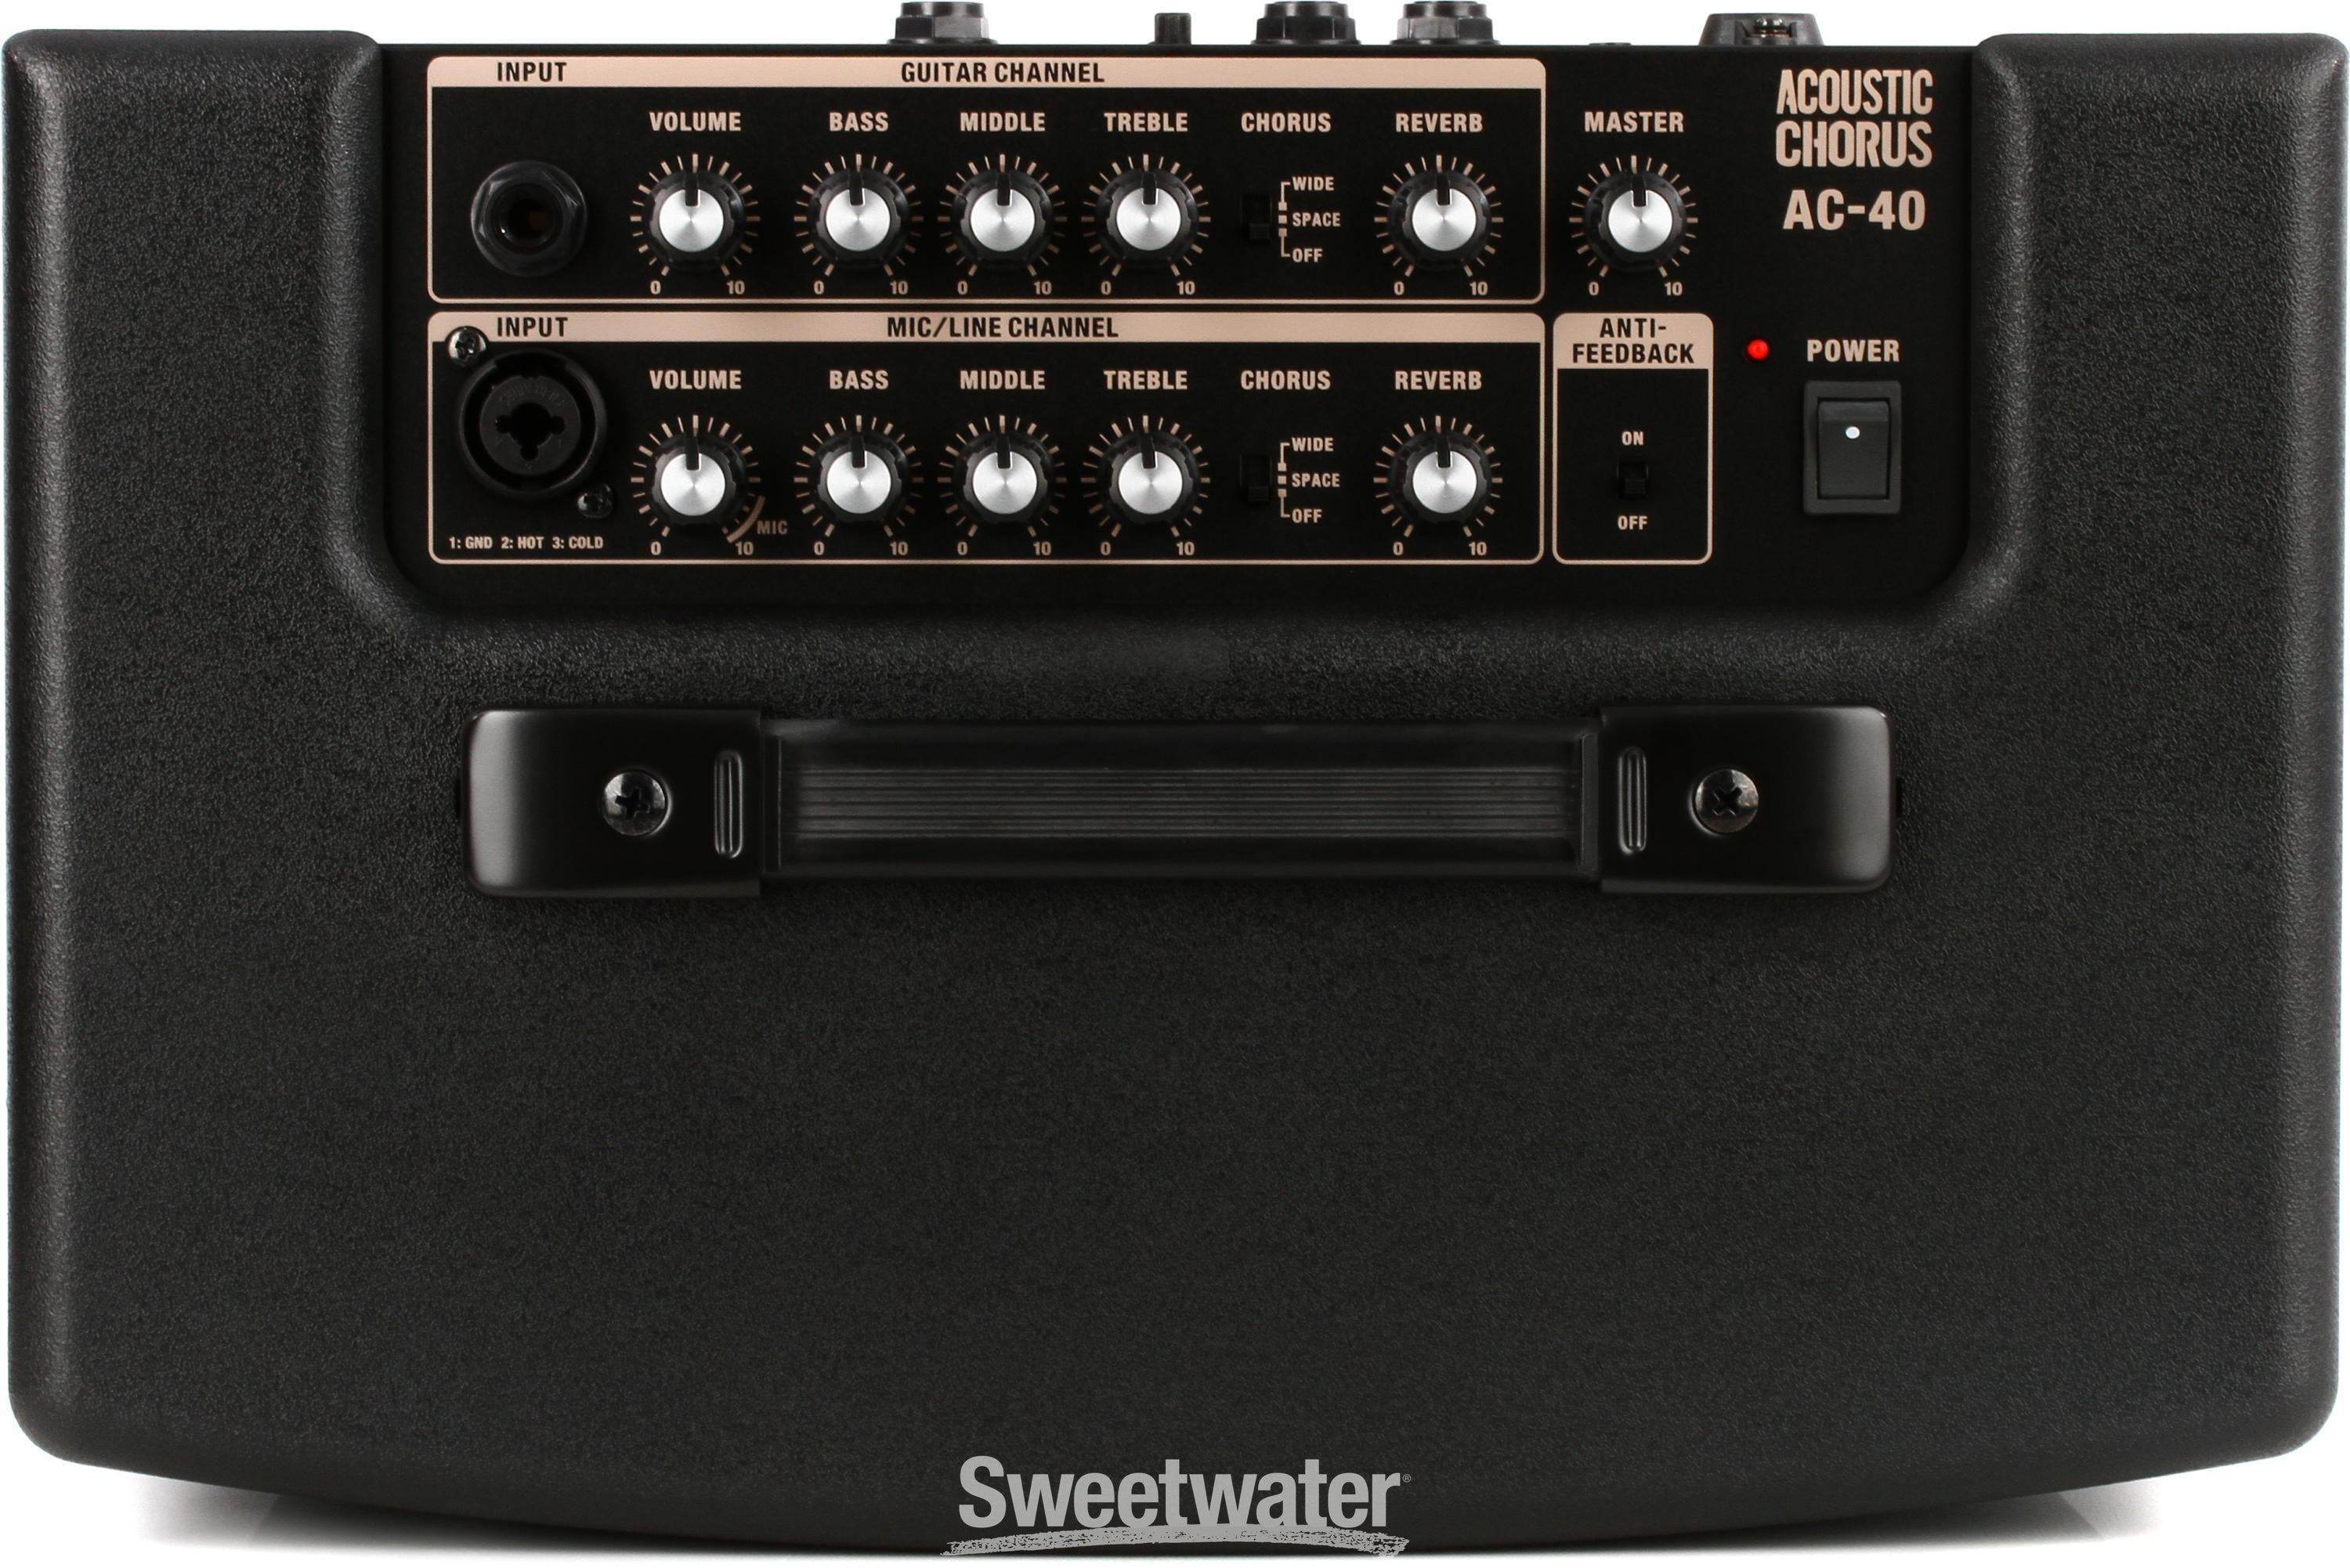 Roland AC-40 - 35-watt 2x6.5 Acoustic Amp Reviews | Sweetwater